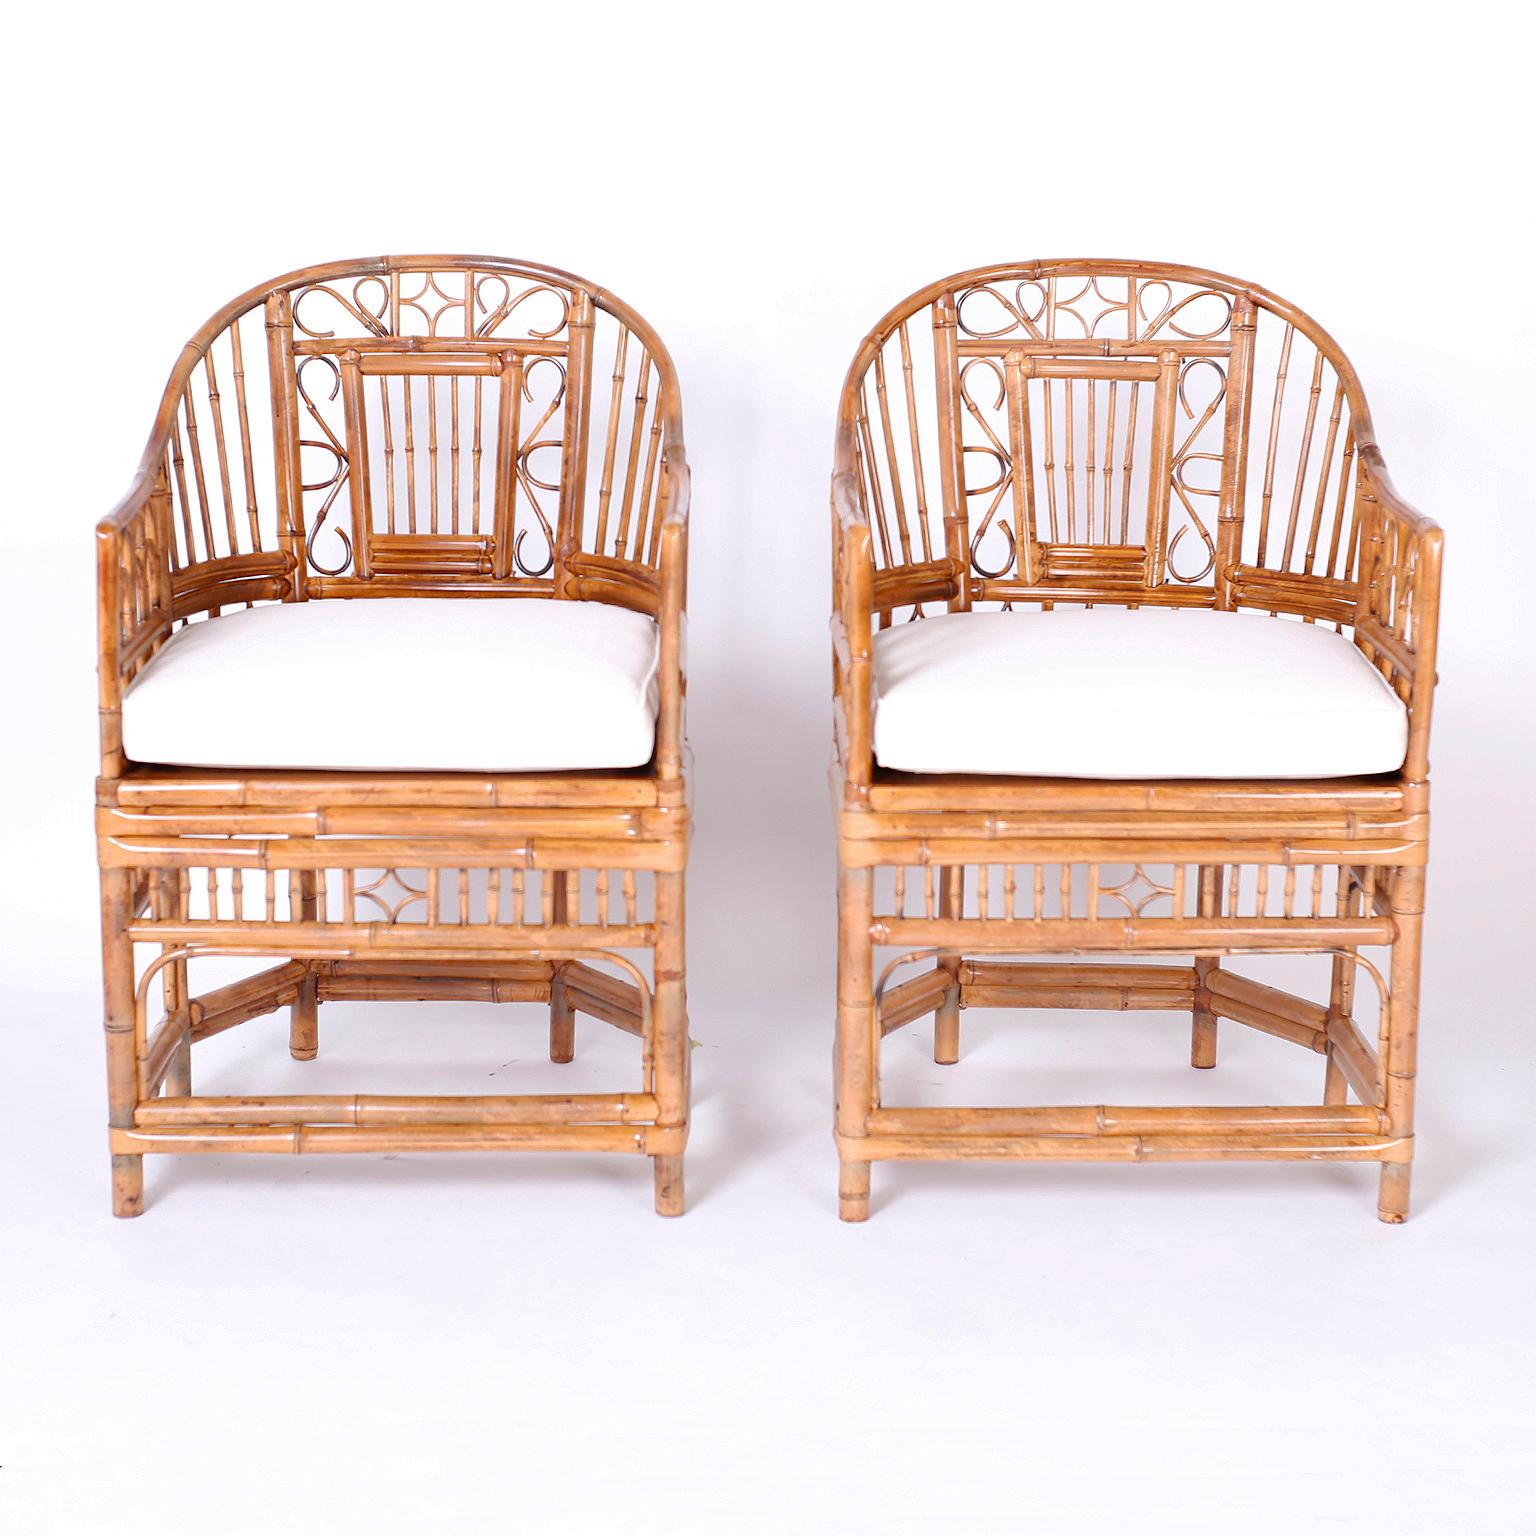 Pair of mid century chairs with caned seats crafted with bamboo and bent bamboo in a classic Brighton Pavilion form. 

Seat height with cushion: 20